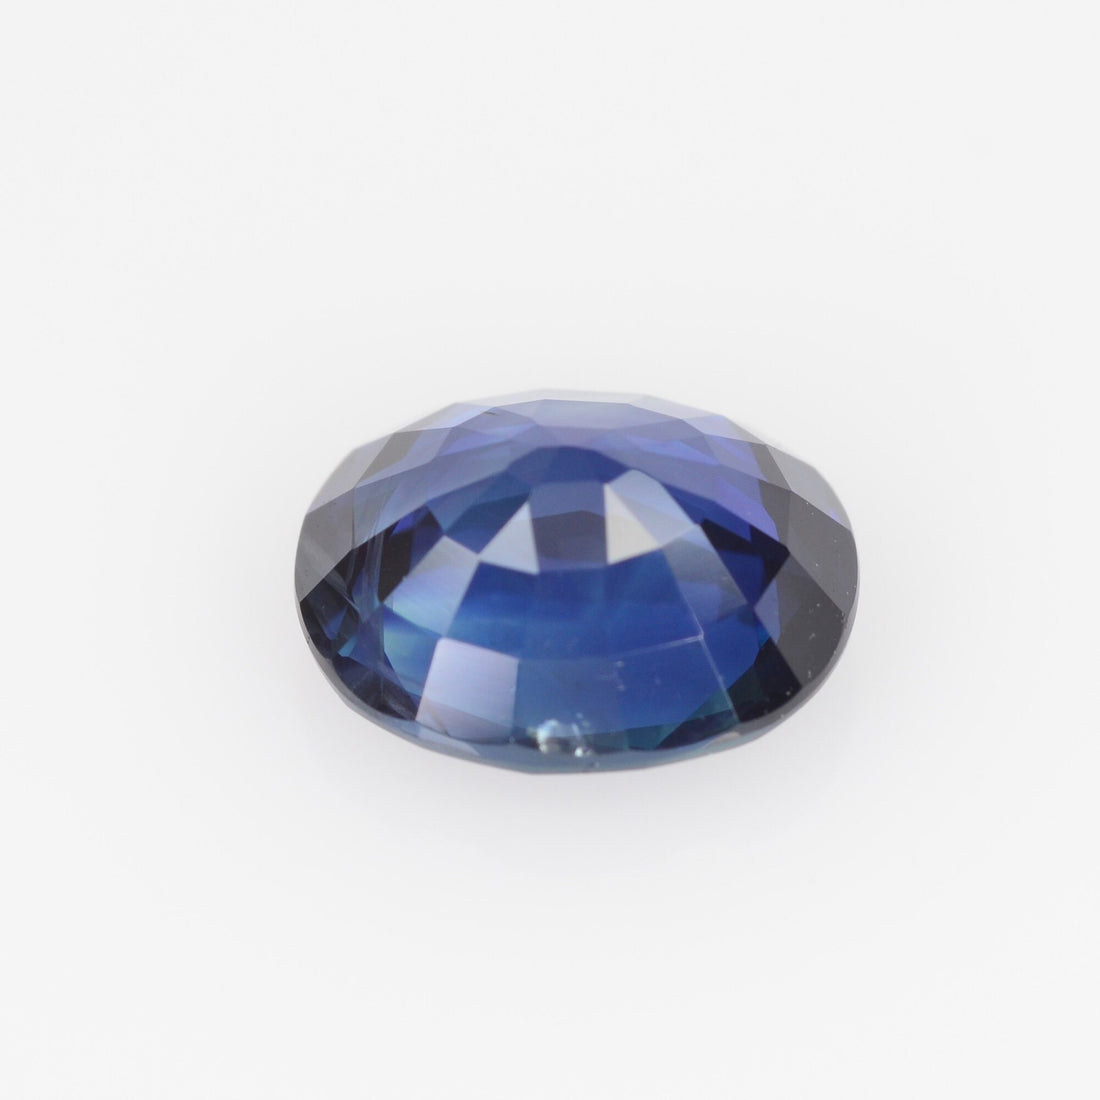 1.75 cts Natural Blue Sapphire Loose Gemstone Oval Cut